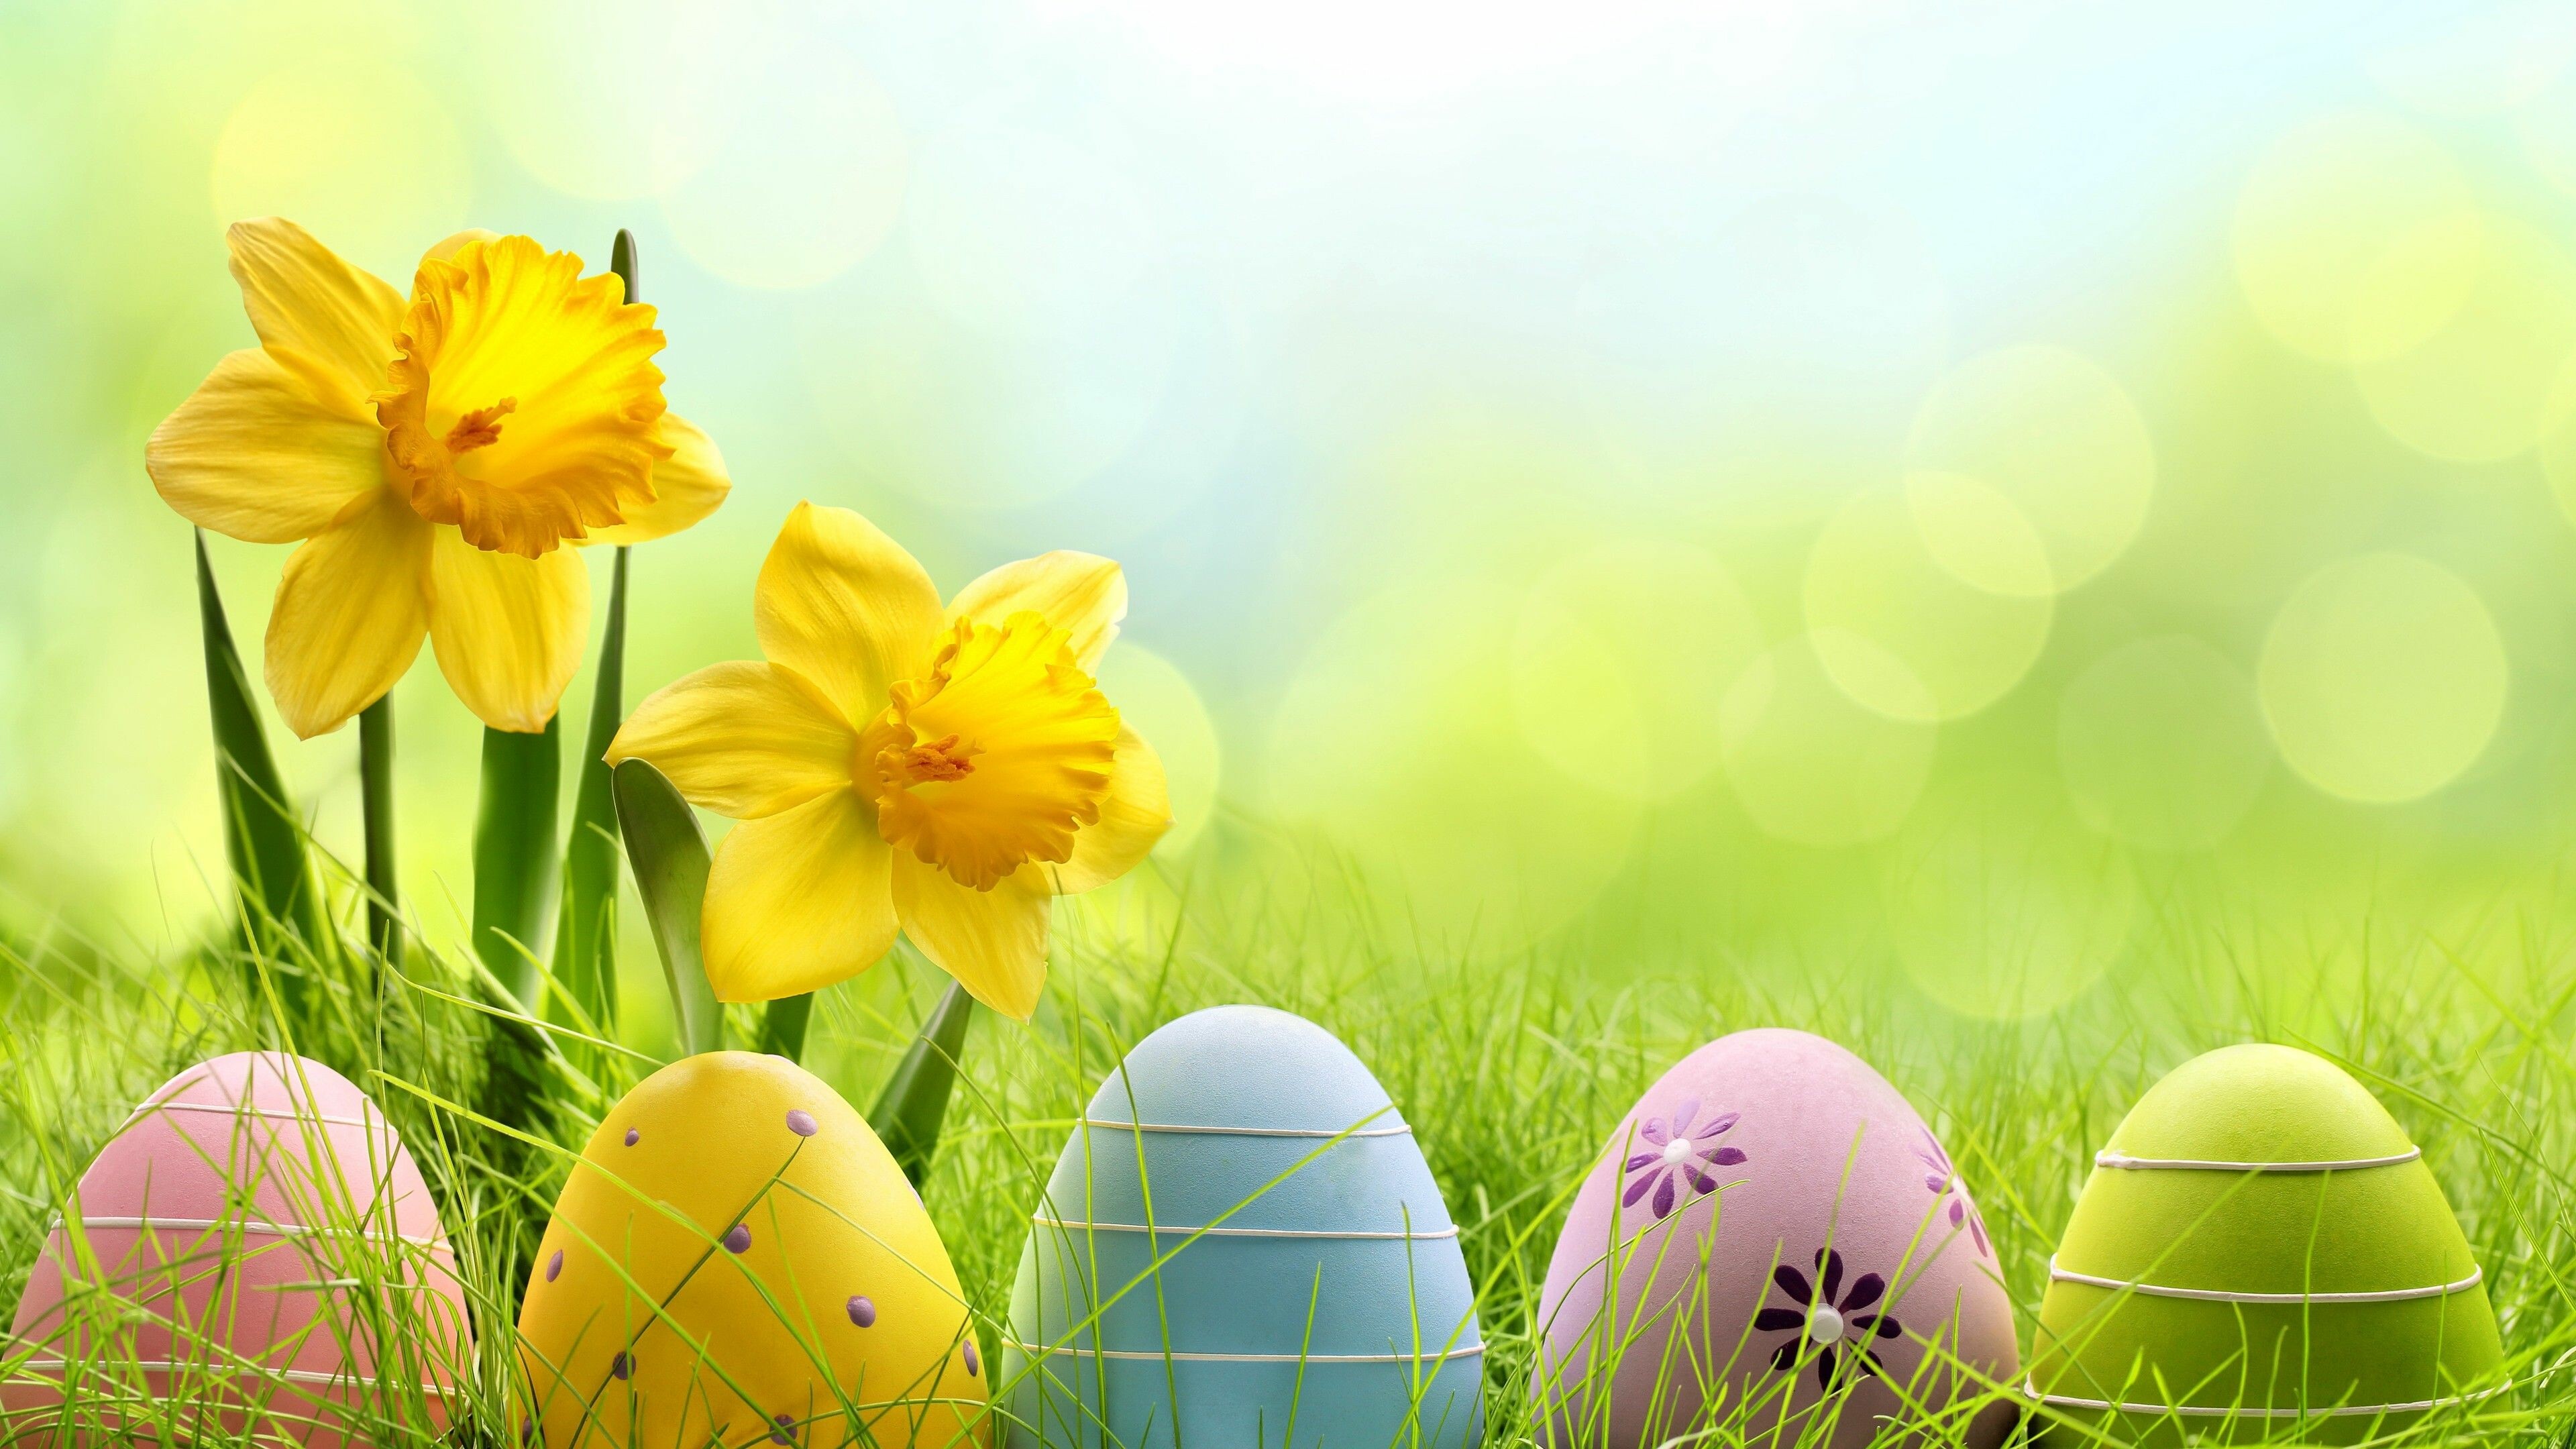 Easter: Holiday, Eggs, Celebrations, A Christian festival and cultural holiday. 3840x2160 4K Background.